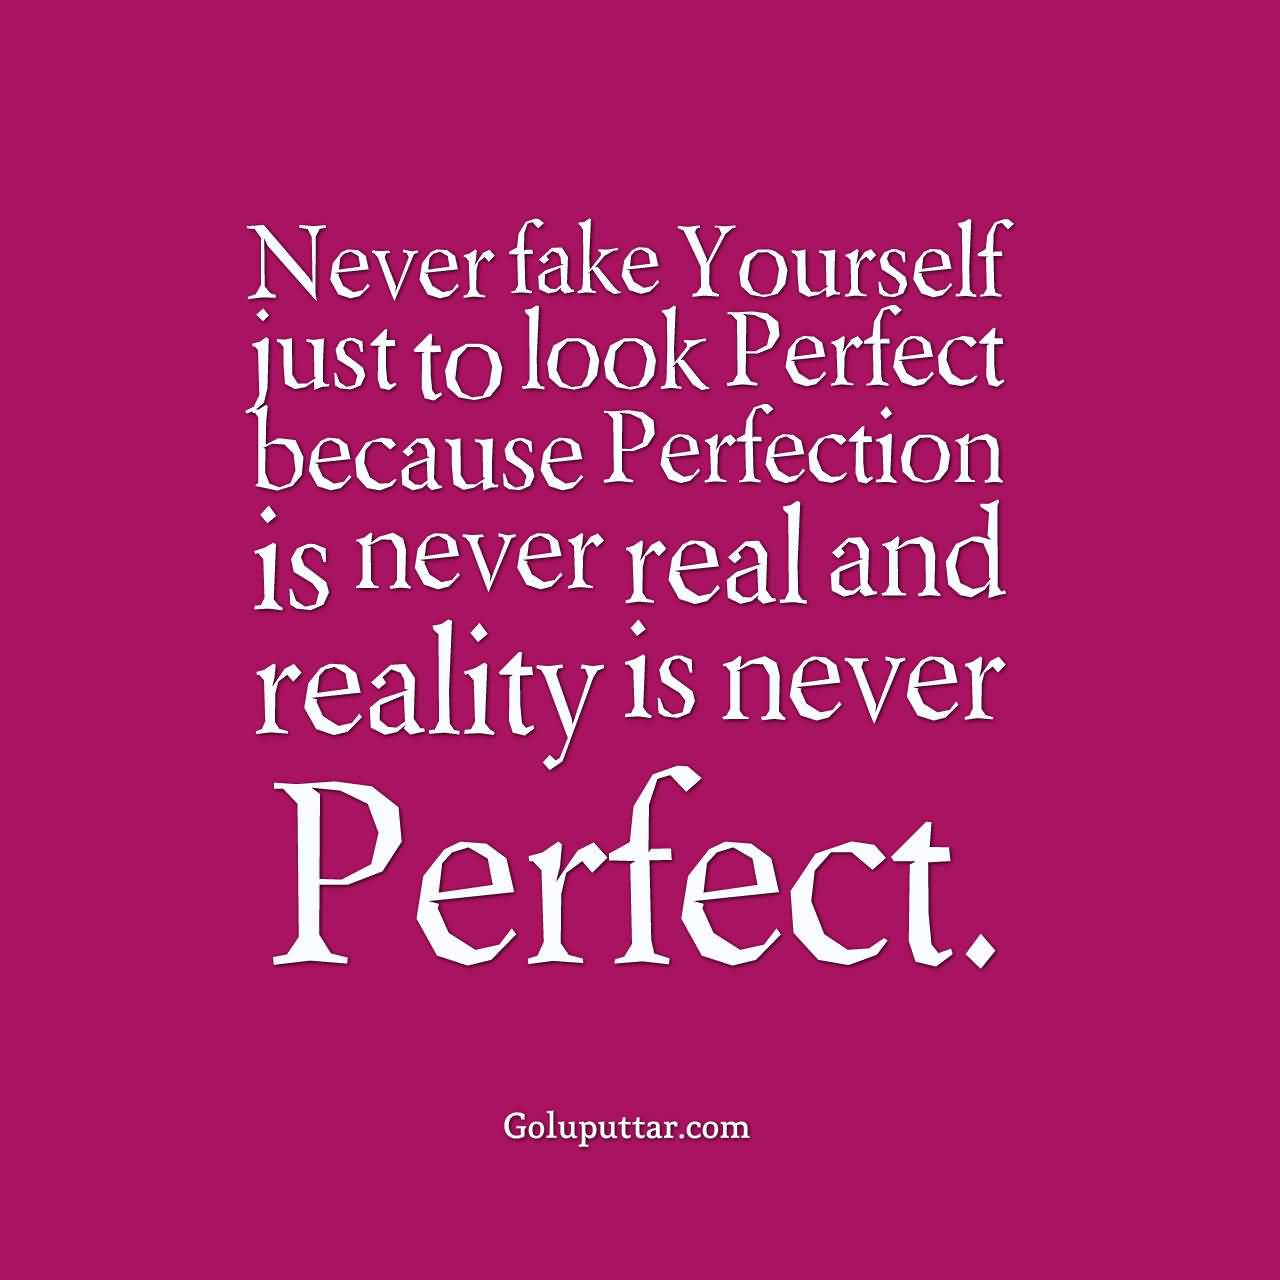 Never fake yourself just to look perfect because Perfection is never real and Reality is never Perfect